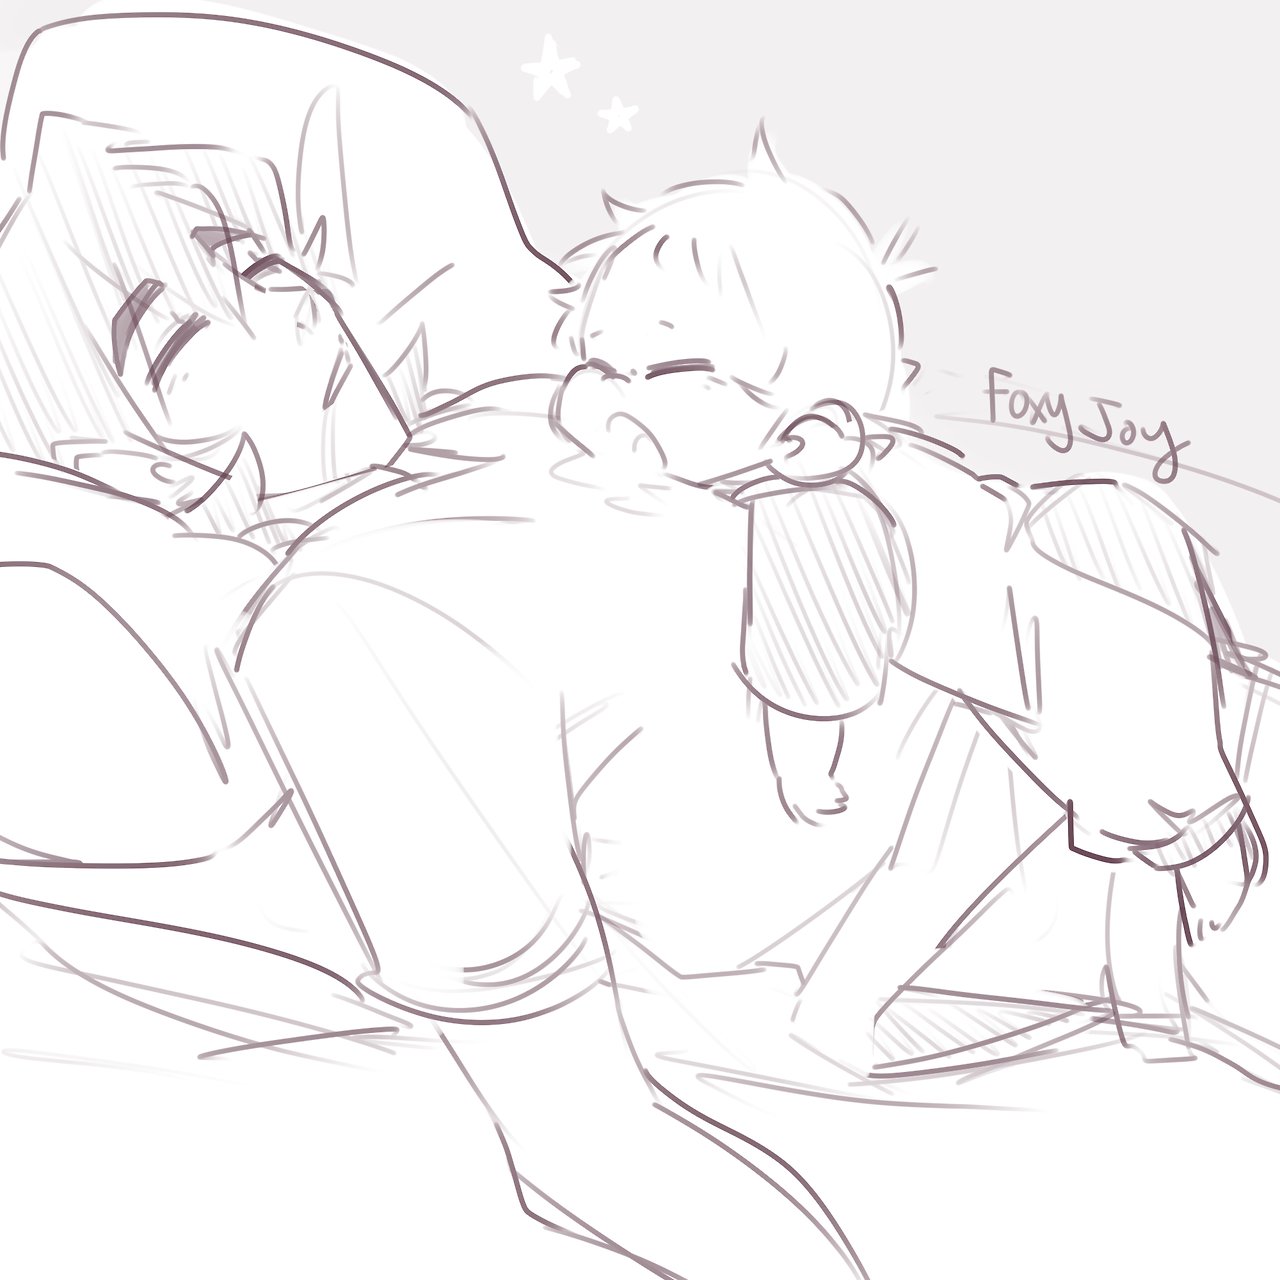 foxyjoy-art:Just imagine for a sec: Keith being good with kids (plus have a bby Lance) 